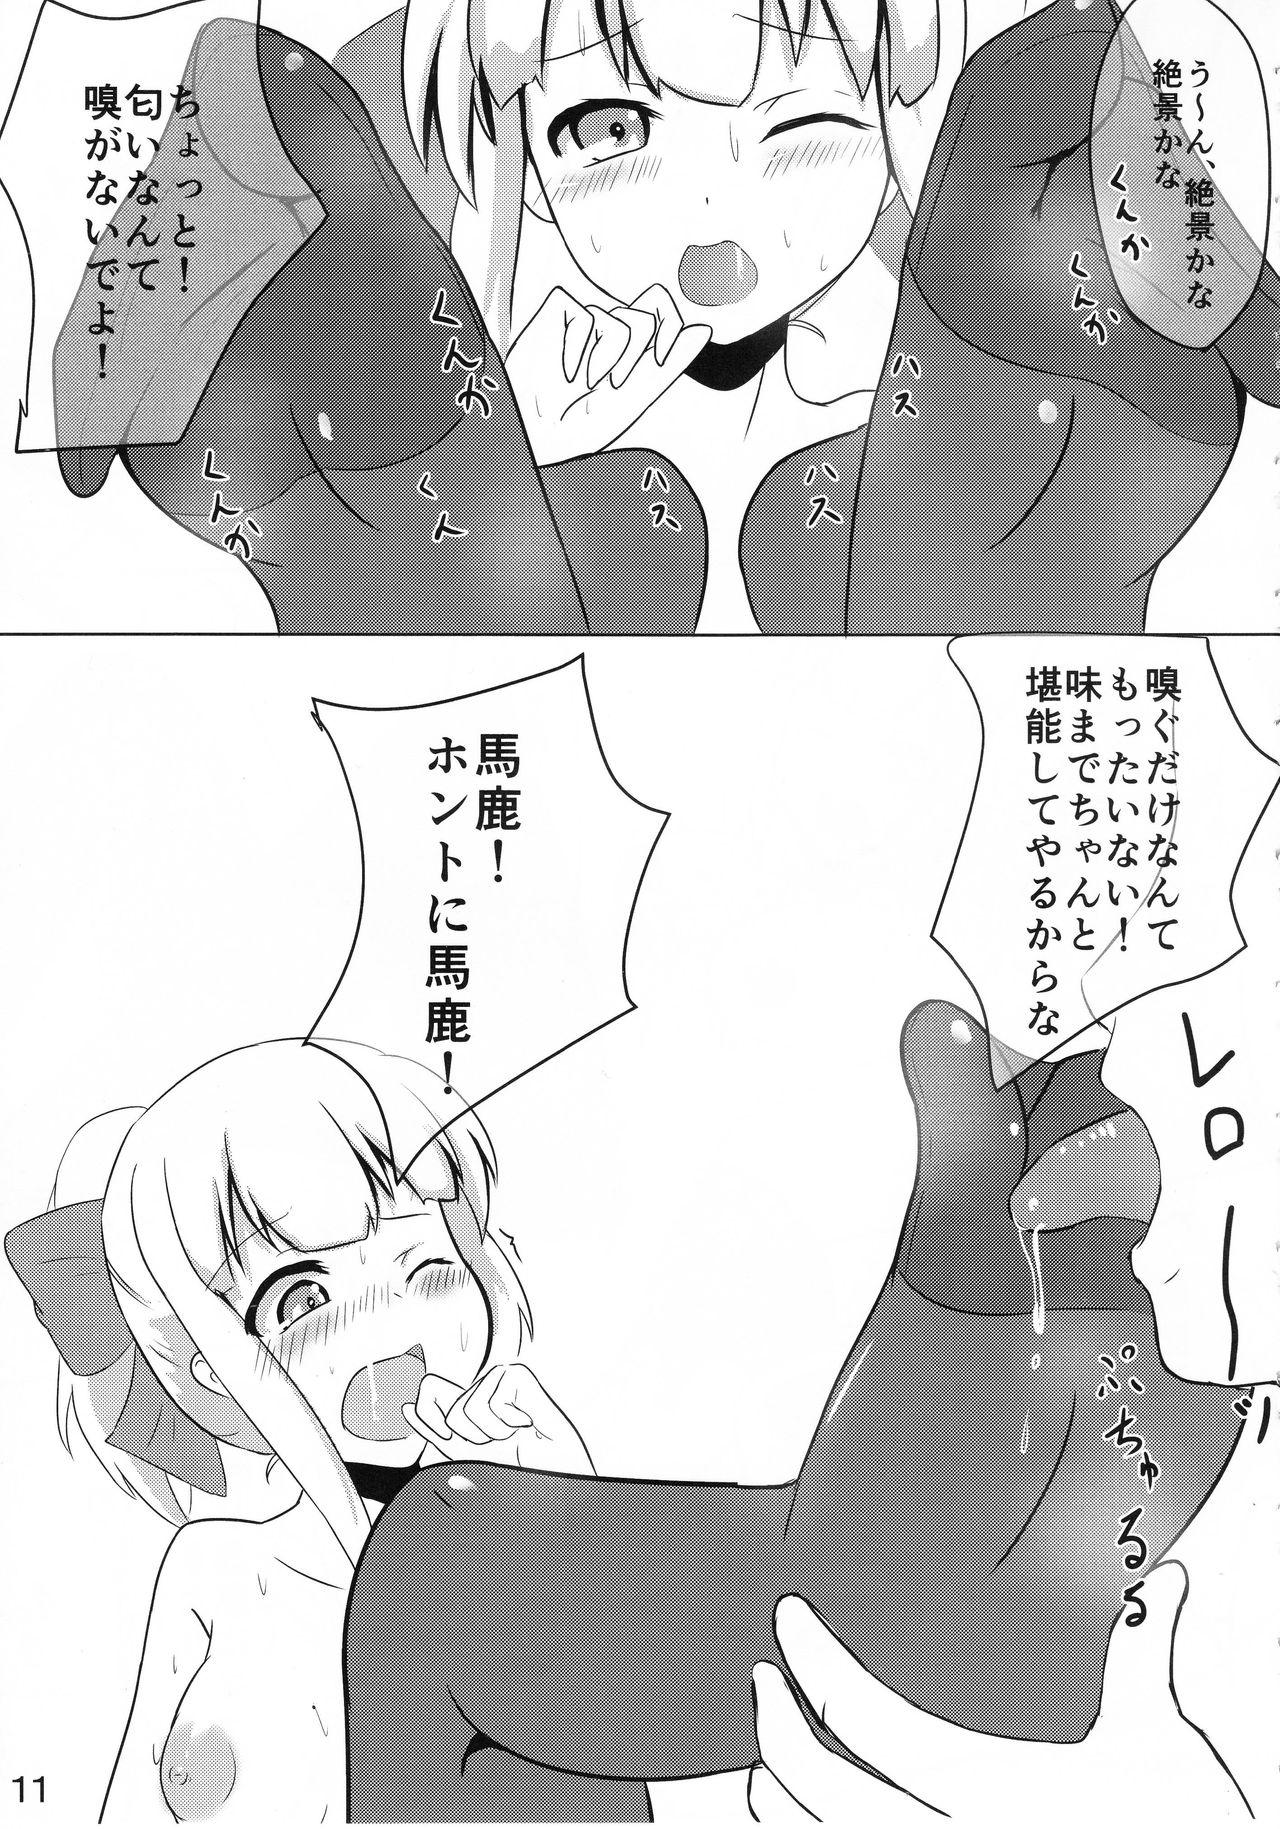 Show HOT SPICE! 3 - Kantai collection Holes - Page 12